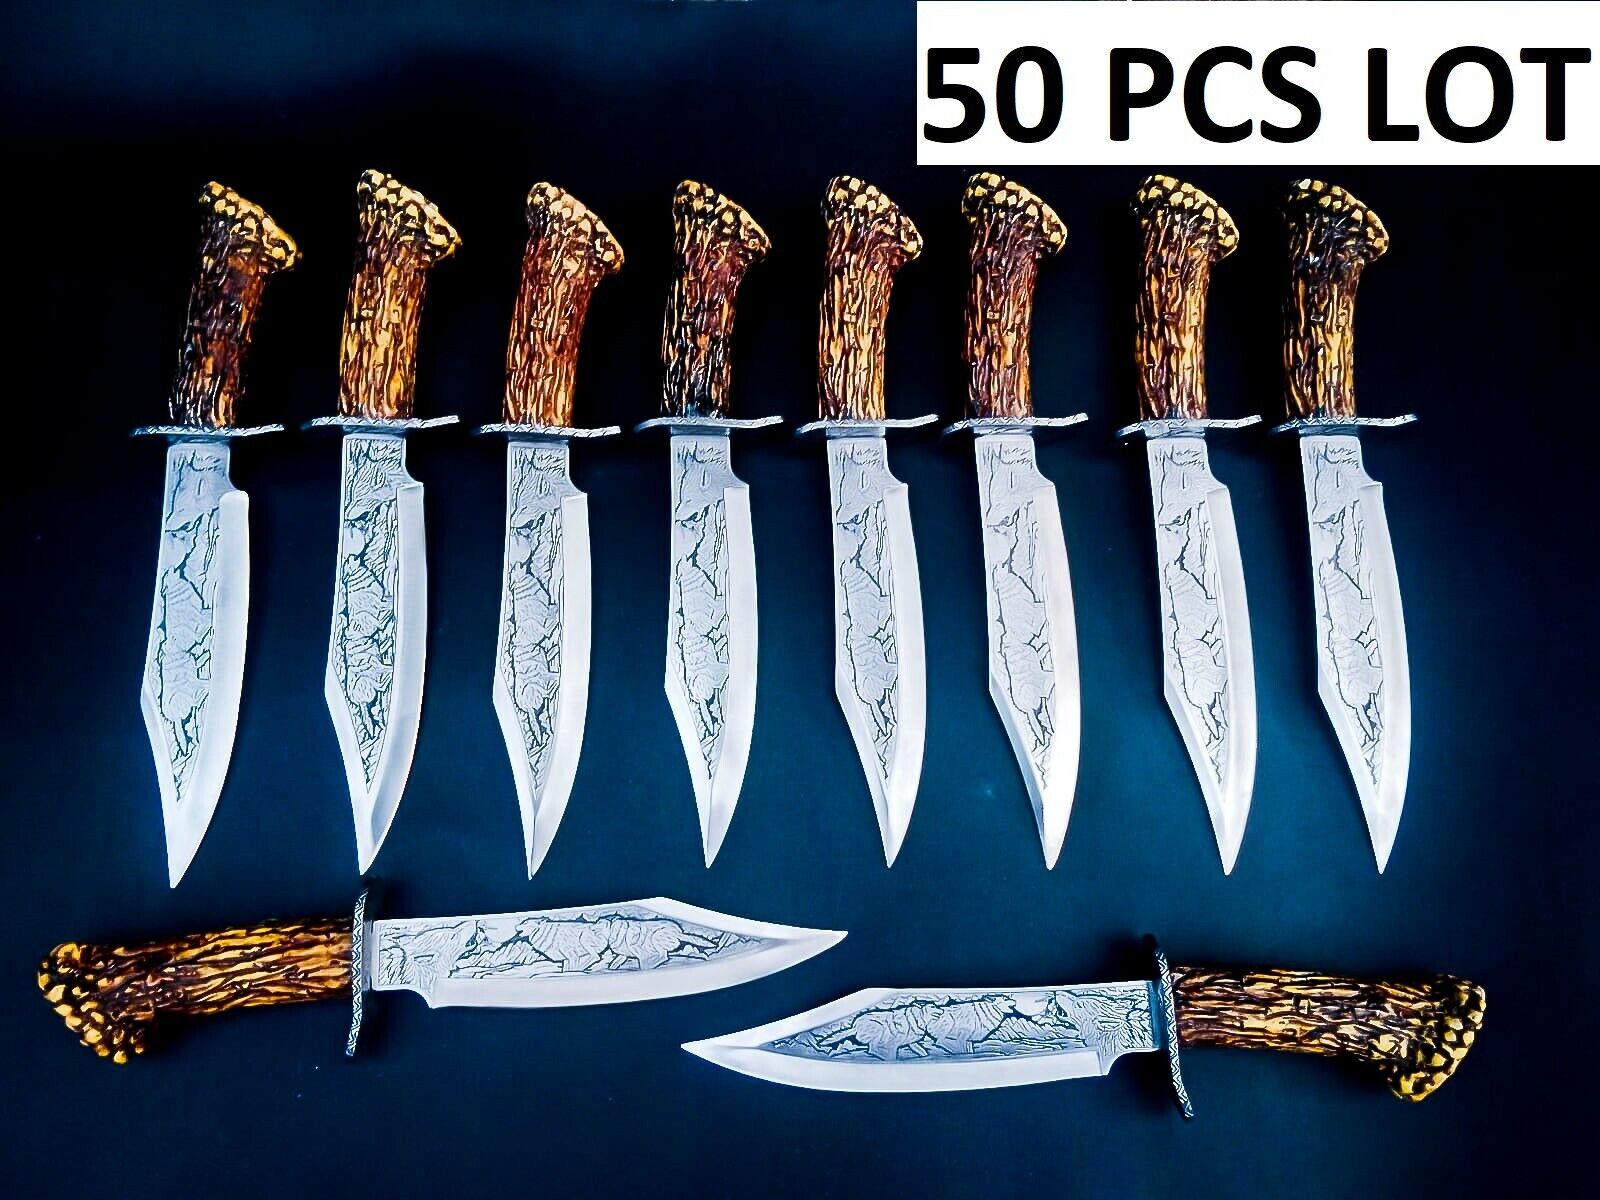 50 PCS LOT, SUPERB CUSTOM HAND FORGED D2 TOOL STEEL BLADE BOWIE HUNTING KNIVES